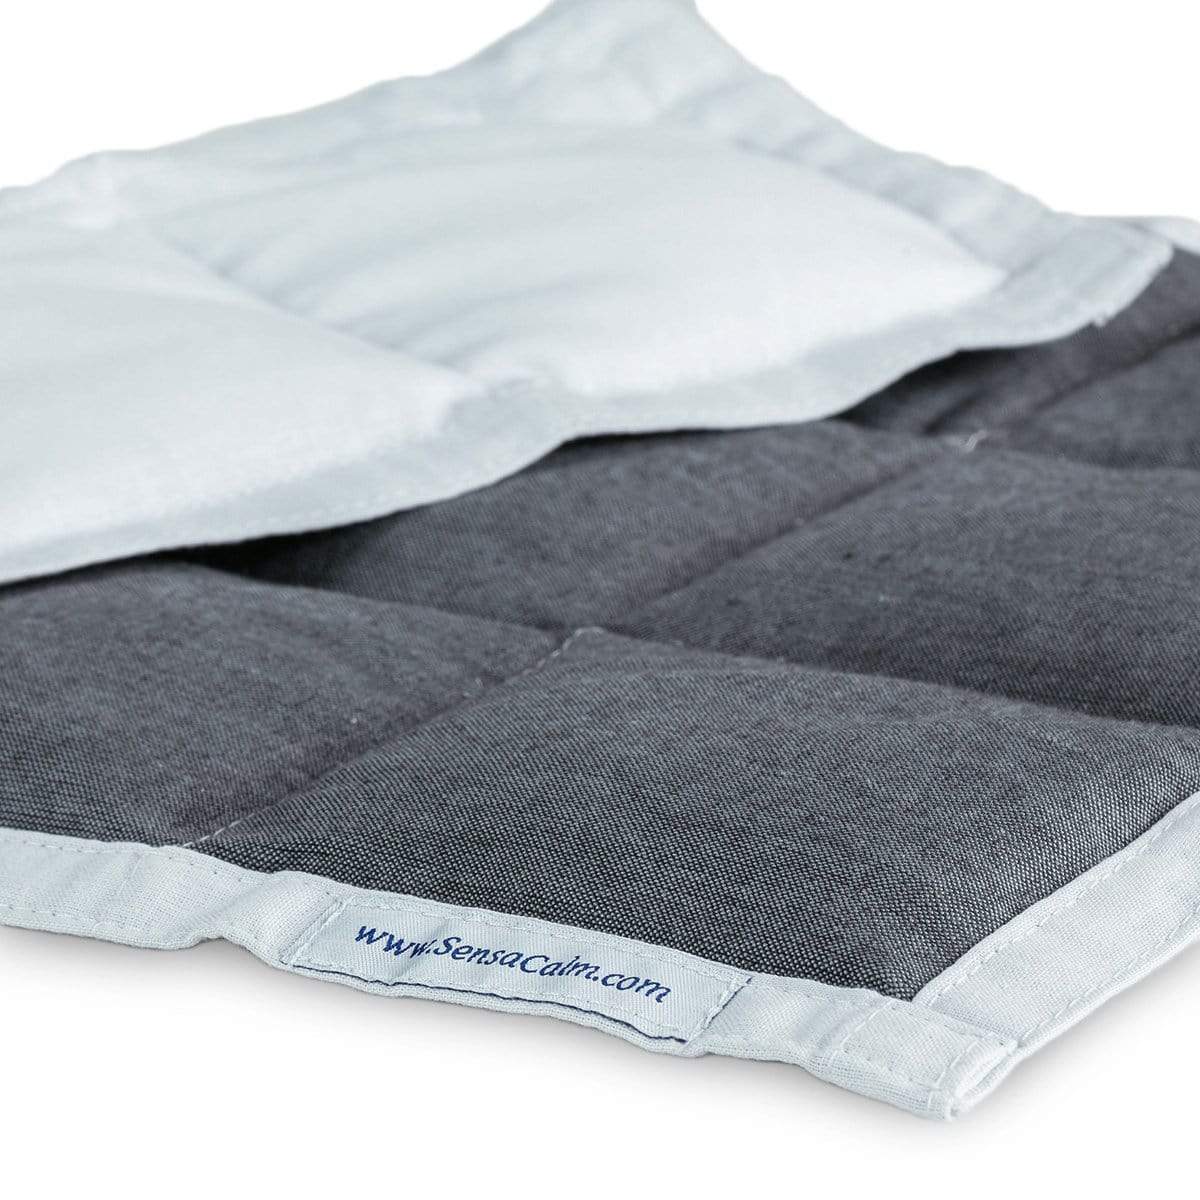 SensaCalm Lap Pads - 5 lb (18" W x 22" L) (Cotton) Peppered Gray and White